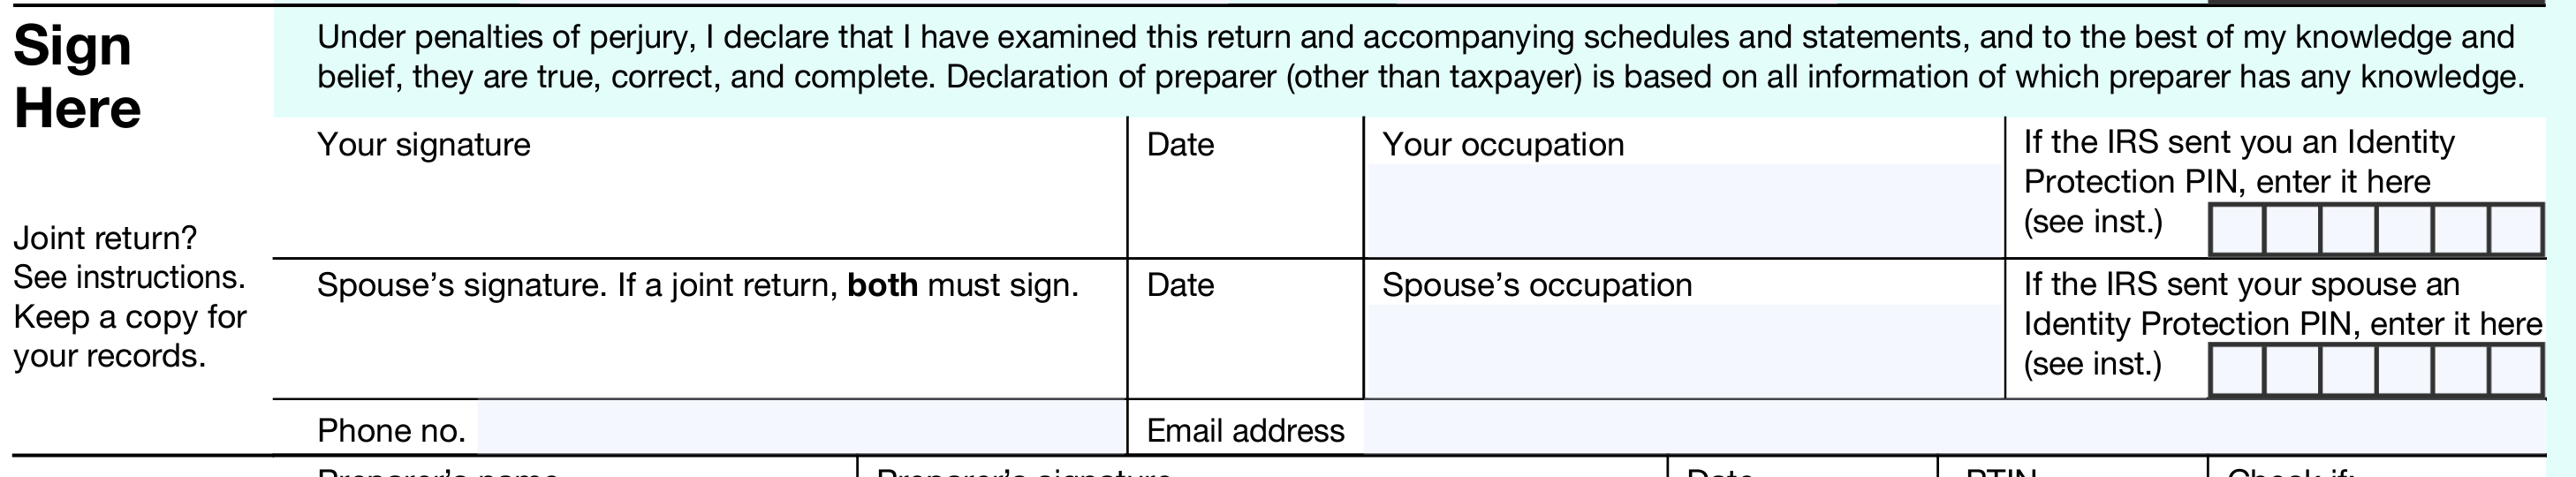 Screen shot of the signature field on Form 1040